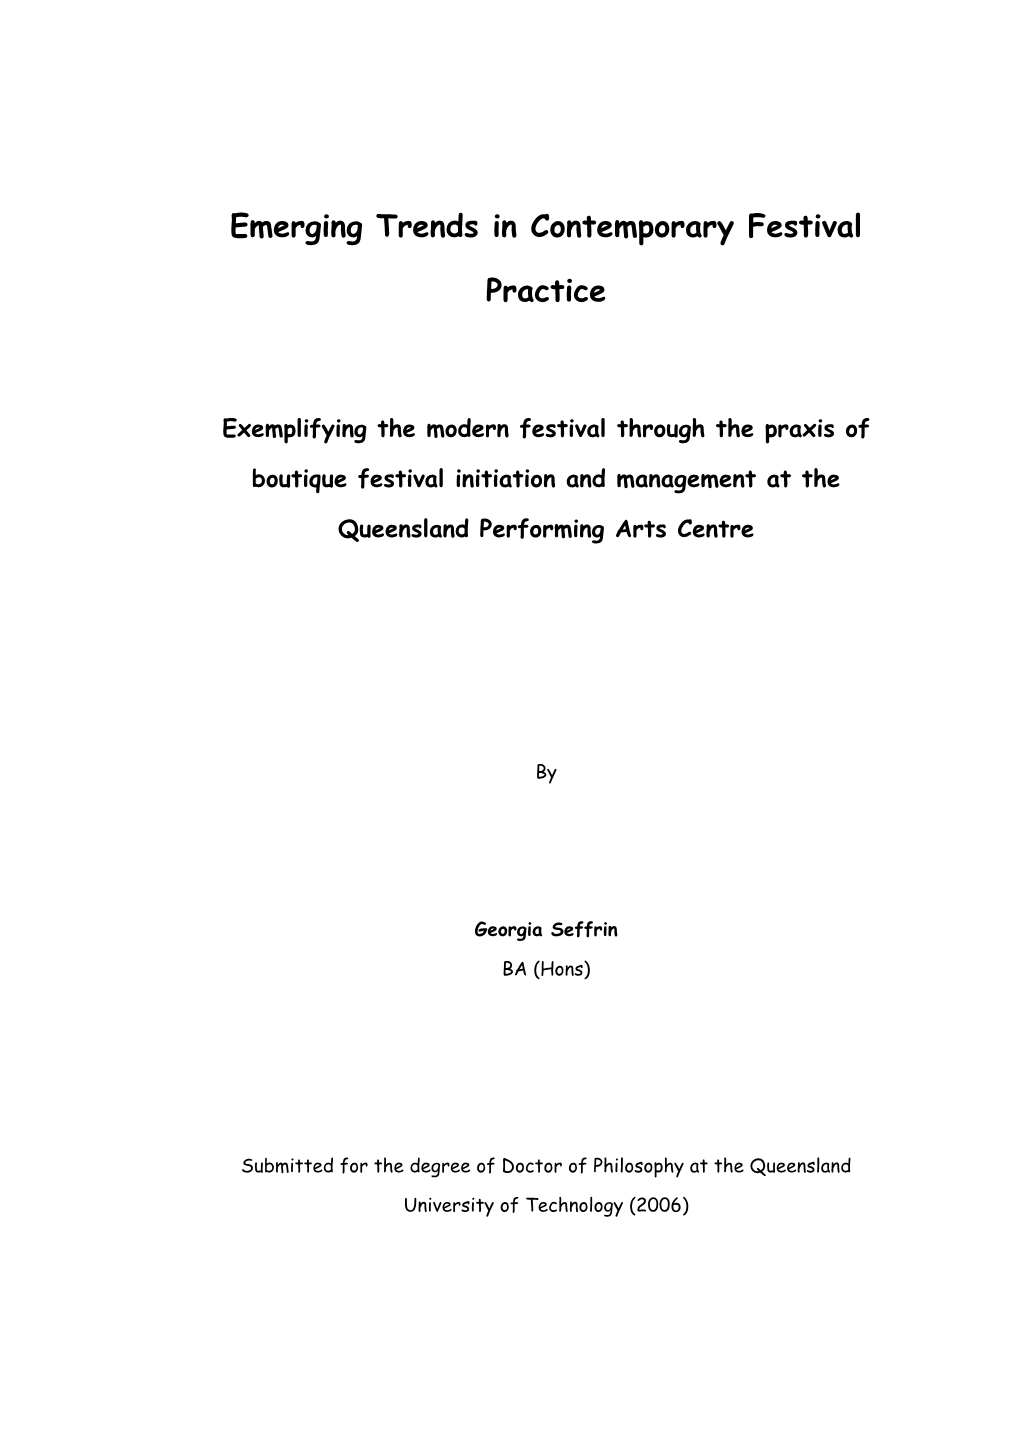 Emerging Trends in Contemporary Festival Practice